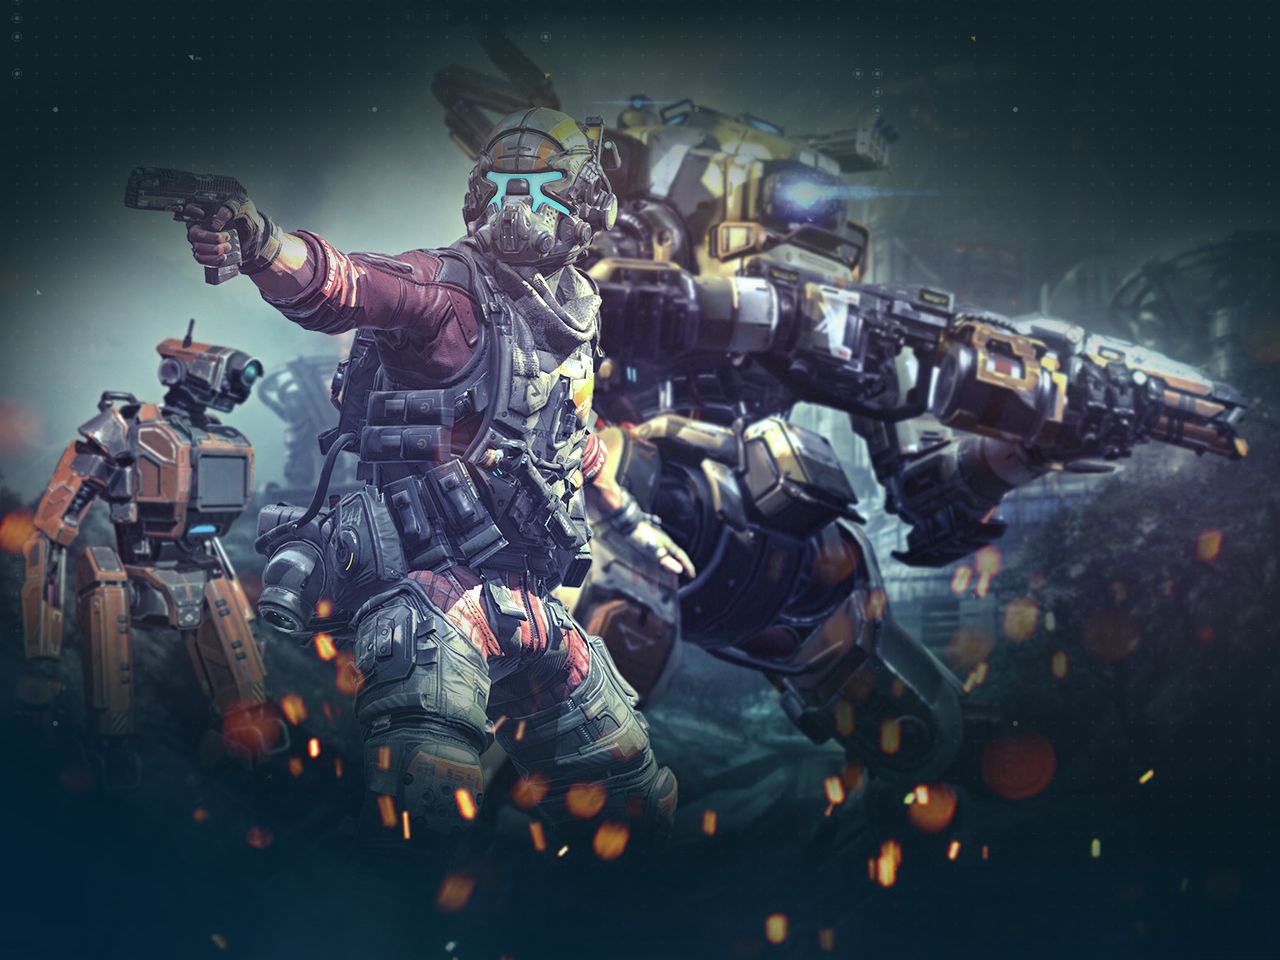 Titanfall Collector's Edition: Respawn you're doing it right